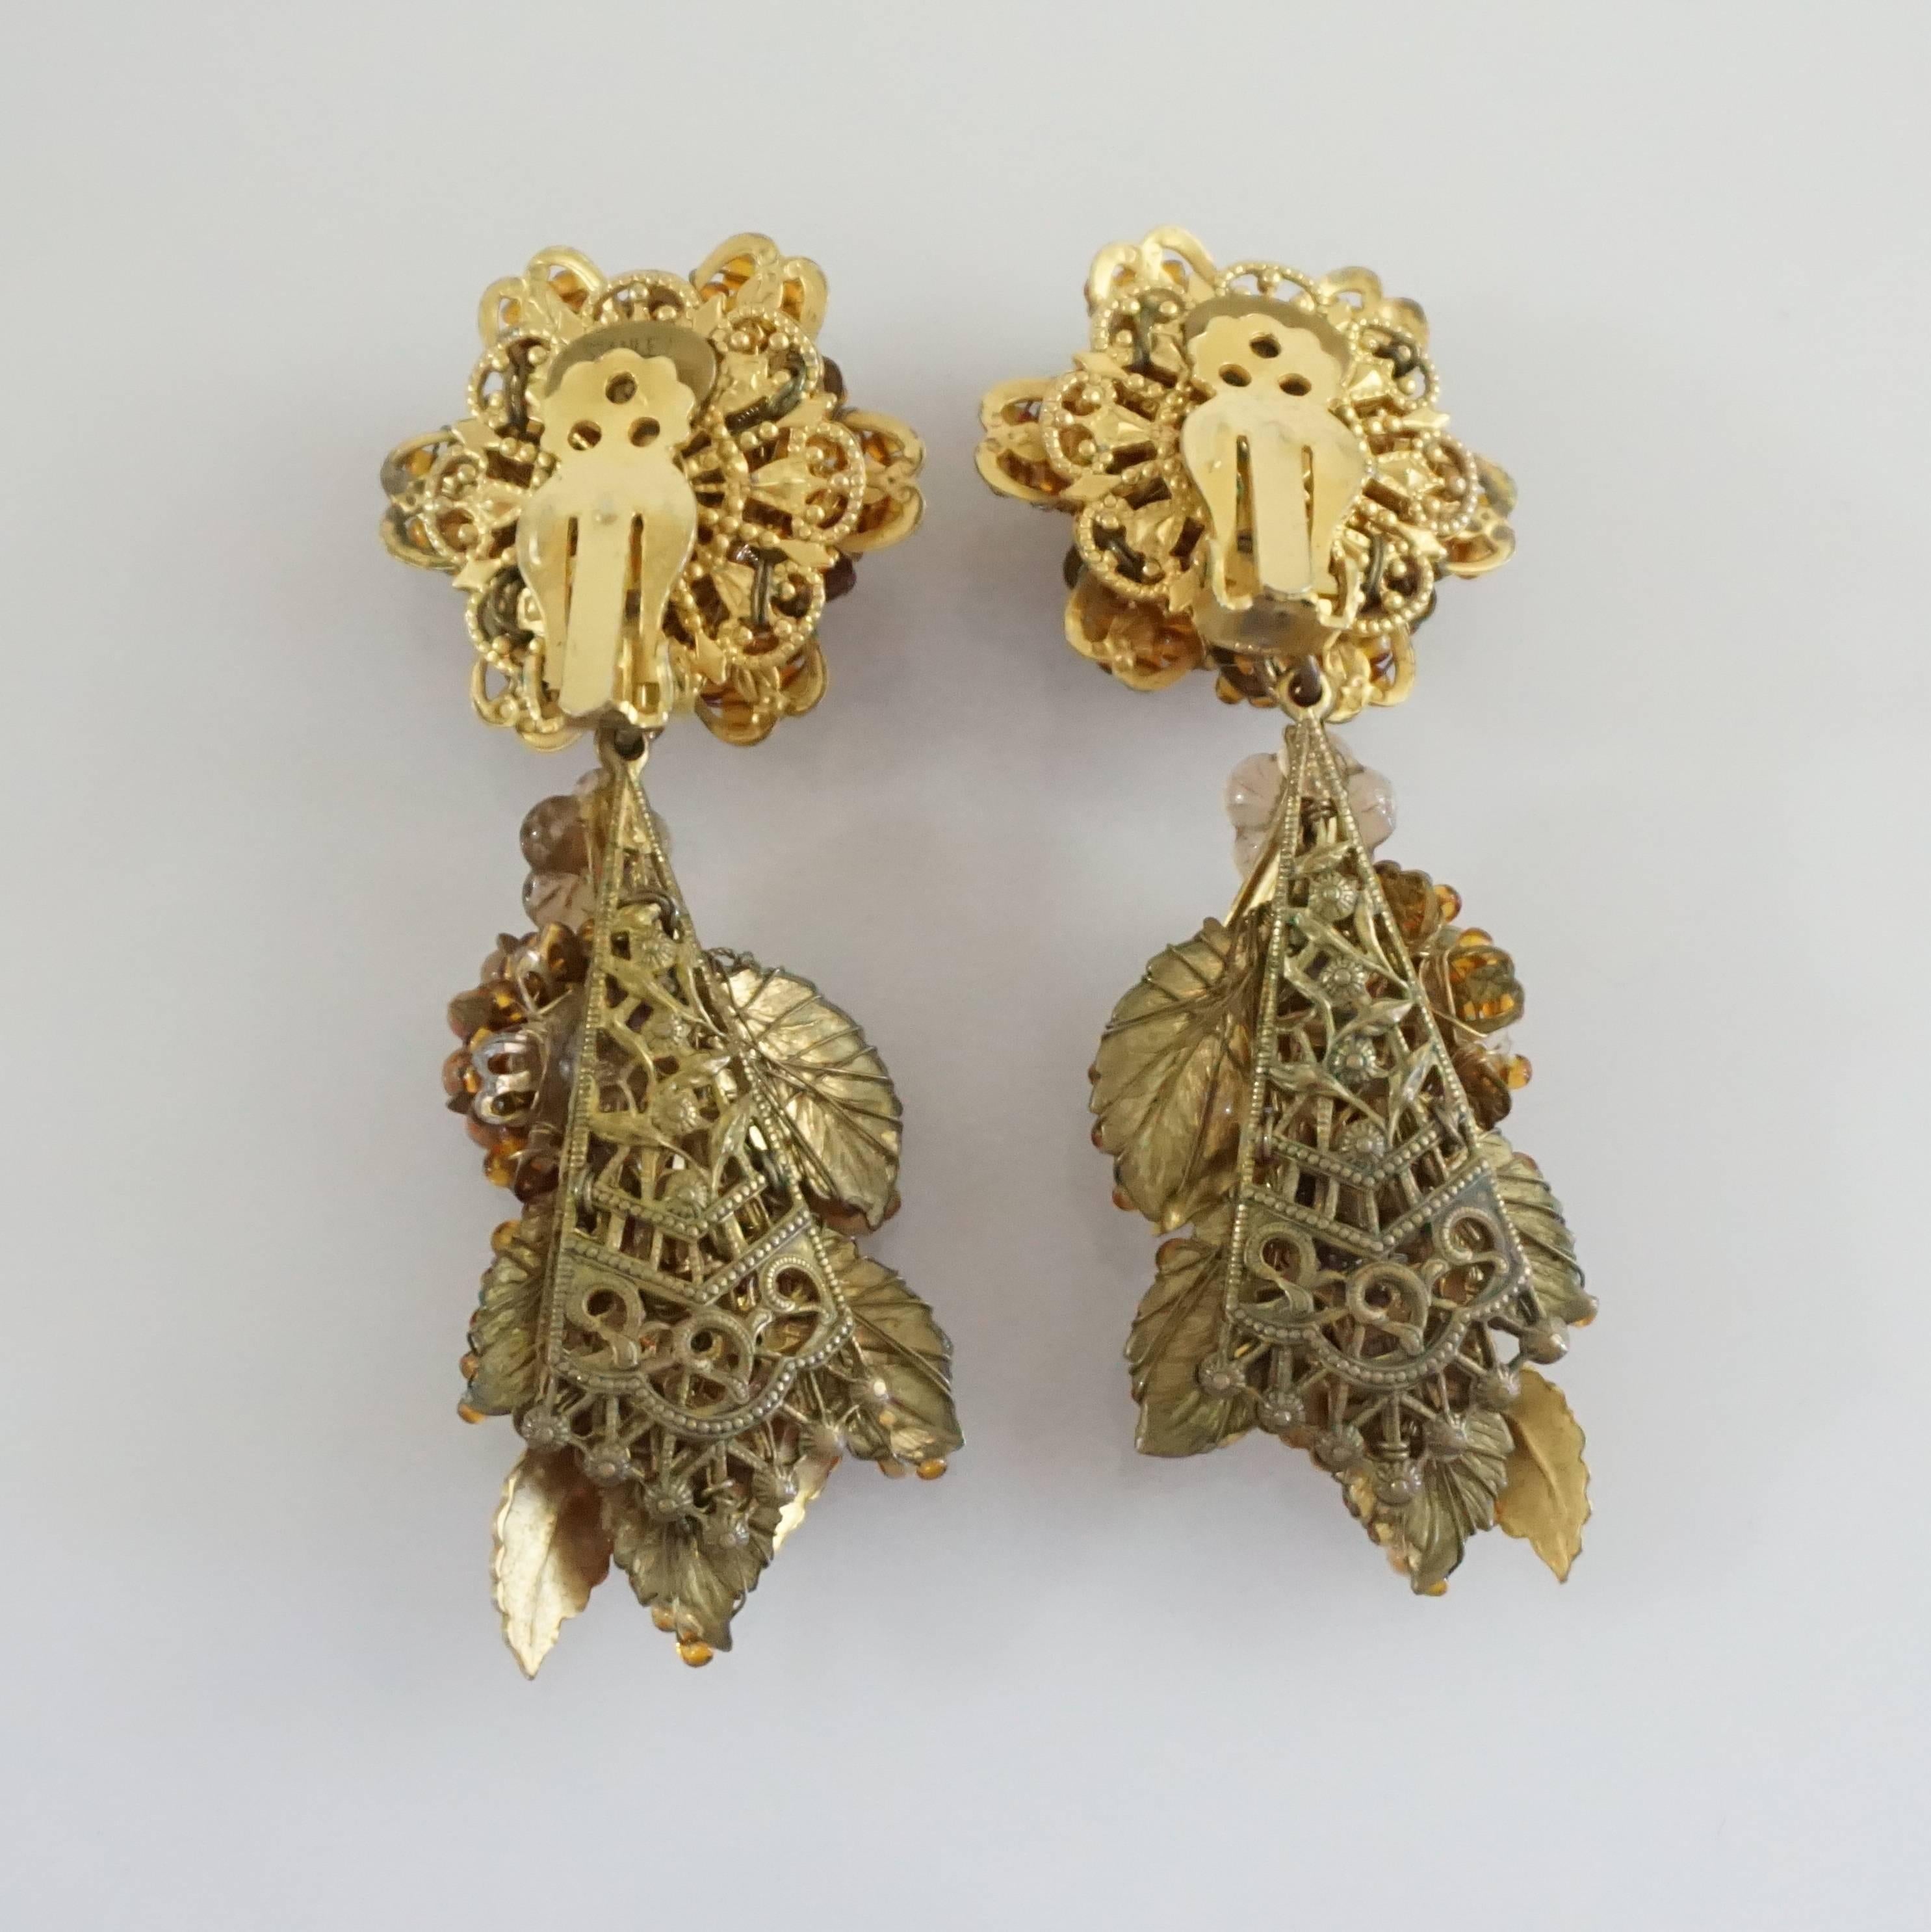 These Stanley Hagler drop earrings are beads in an amber color. They have a floral and leaf design and a clip-on back. These earrings are in very good condition with some wear on the leaves and clip.

Measurements
Width: 1.25